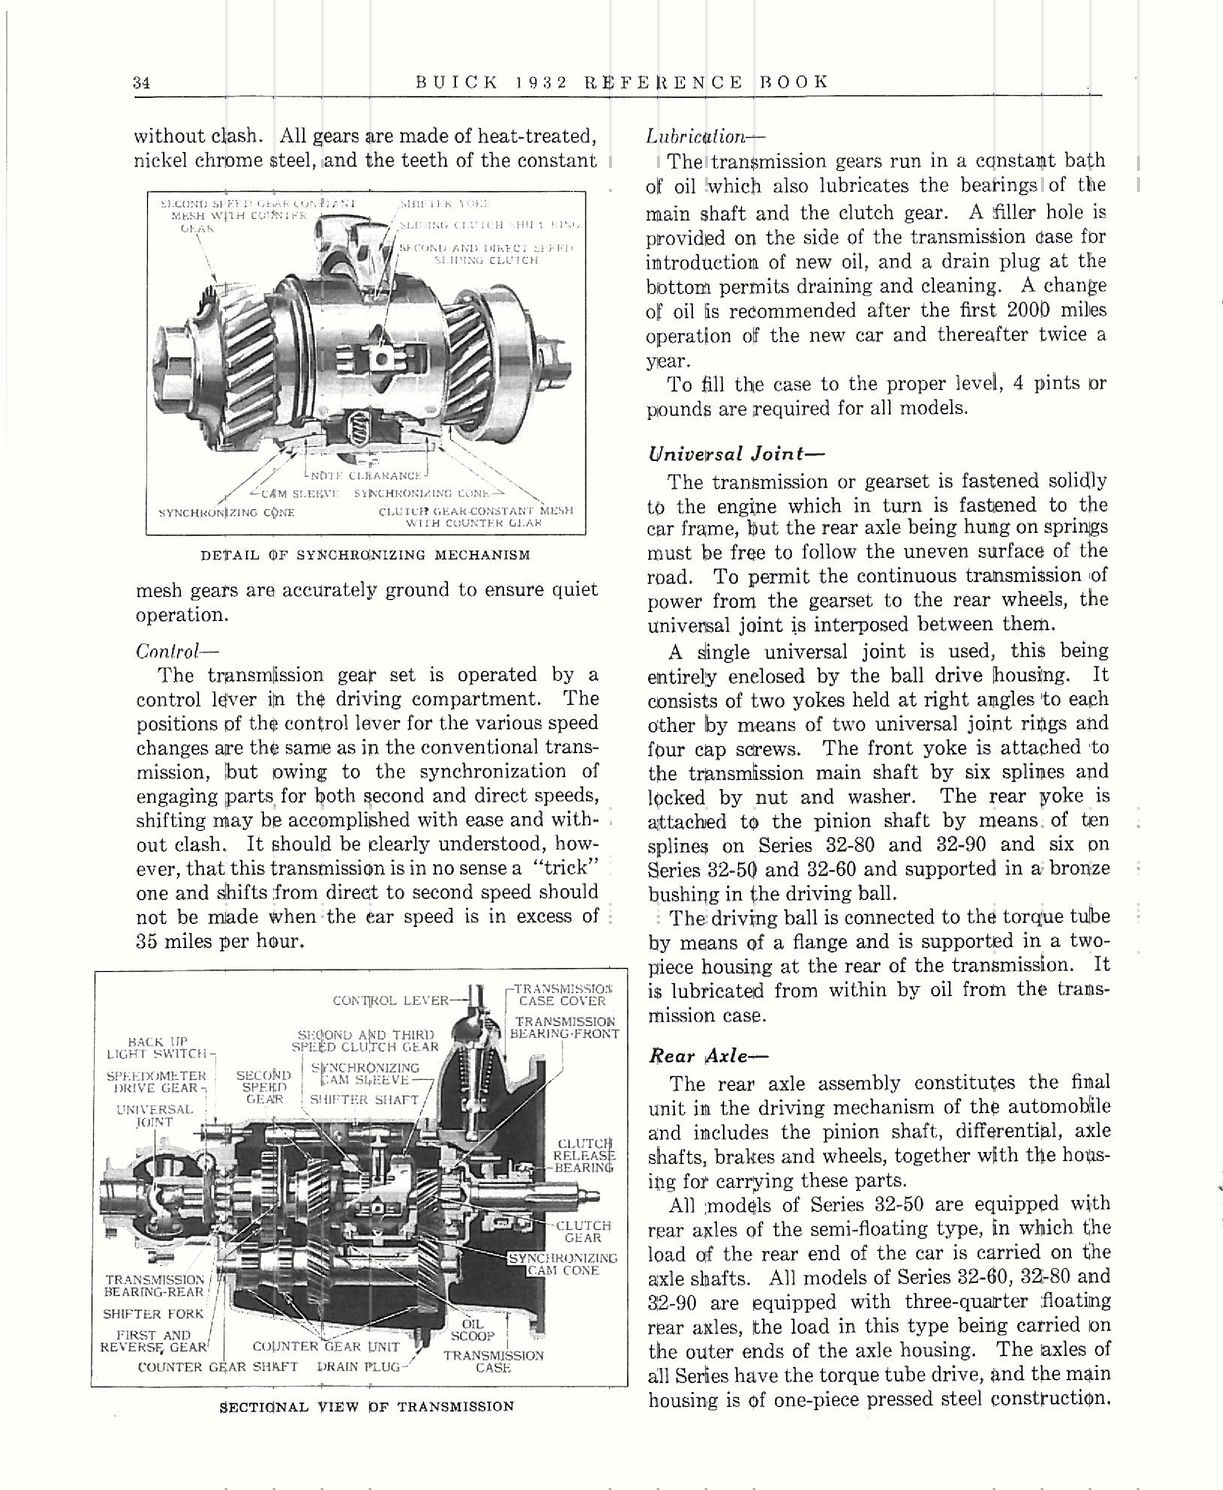 1932 Buick Reference Book-34